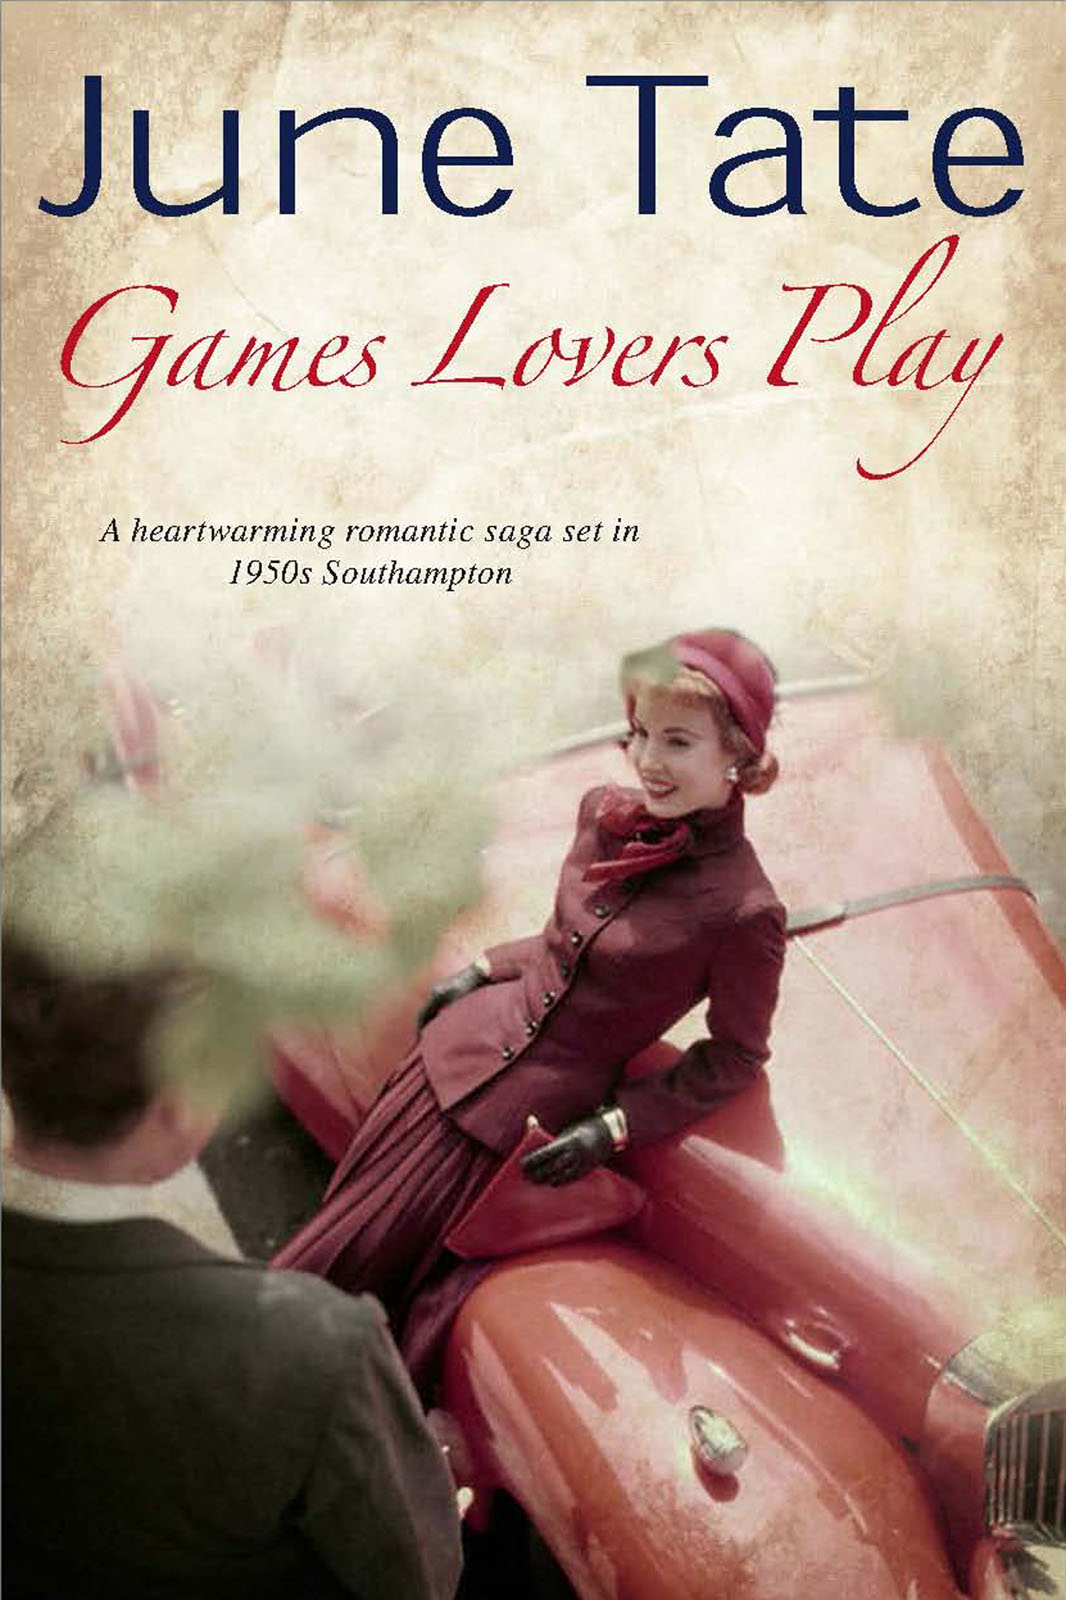 Games Lovers Play (2013) by June Tate